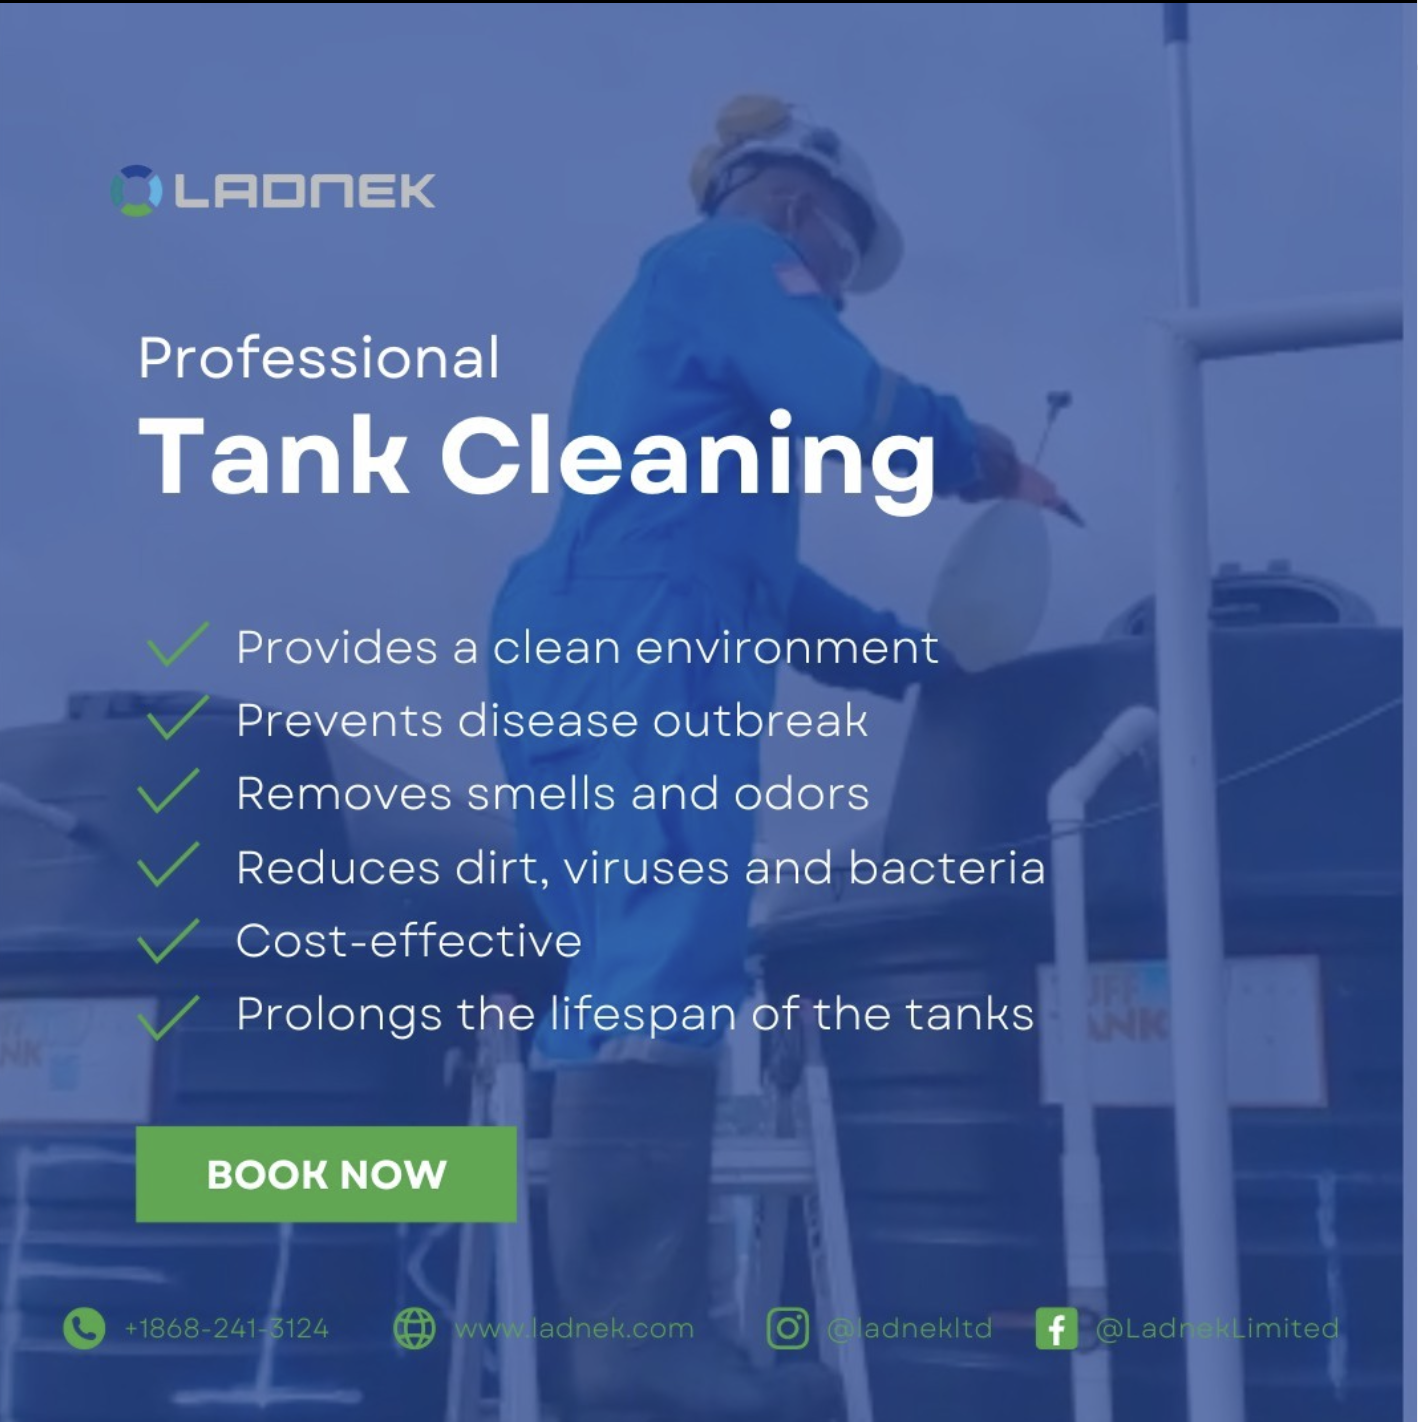 Tank cleaning services contact ladnek